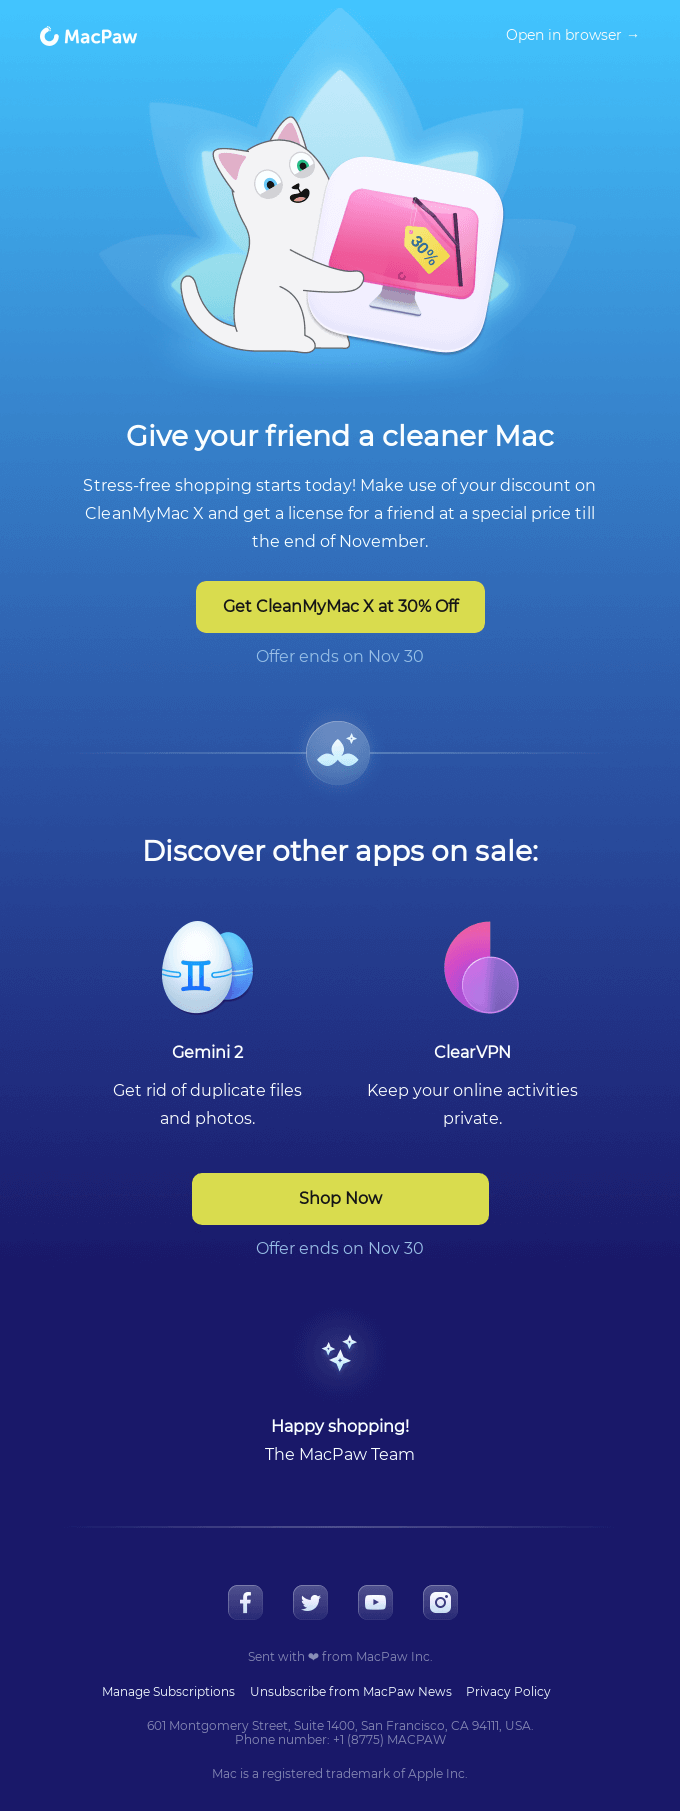 CleanMyMac X and other apps are 30% off